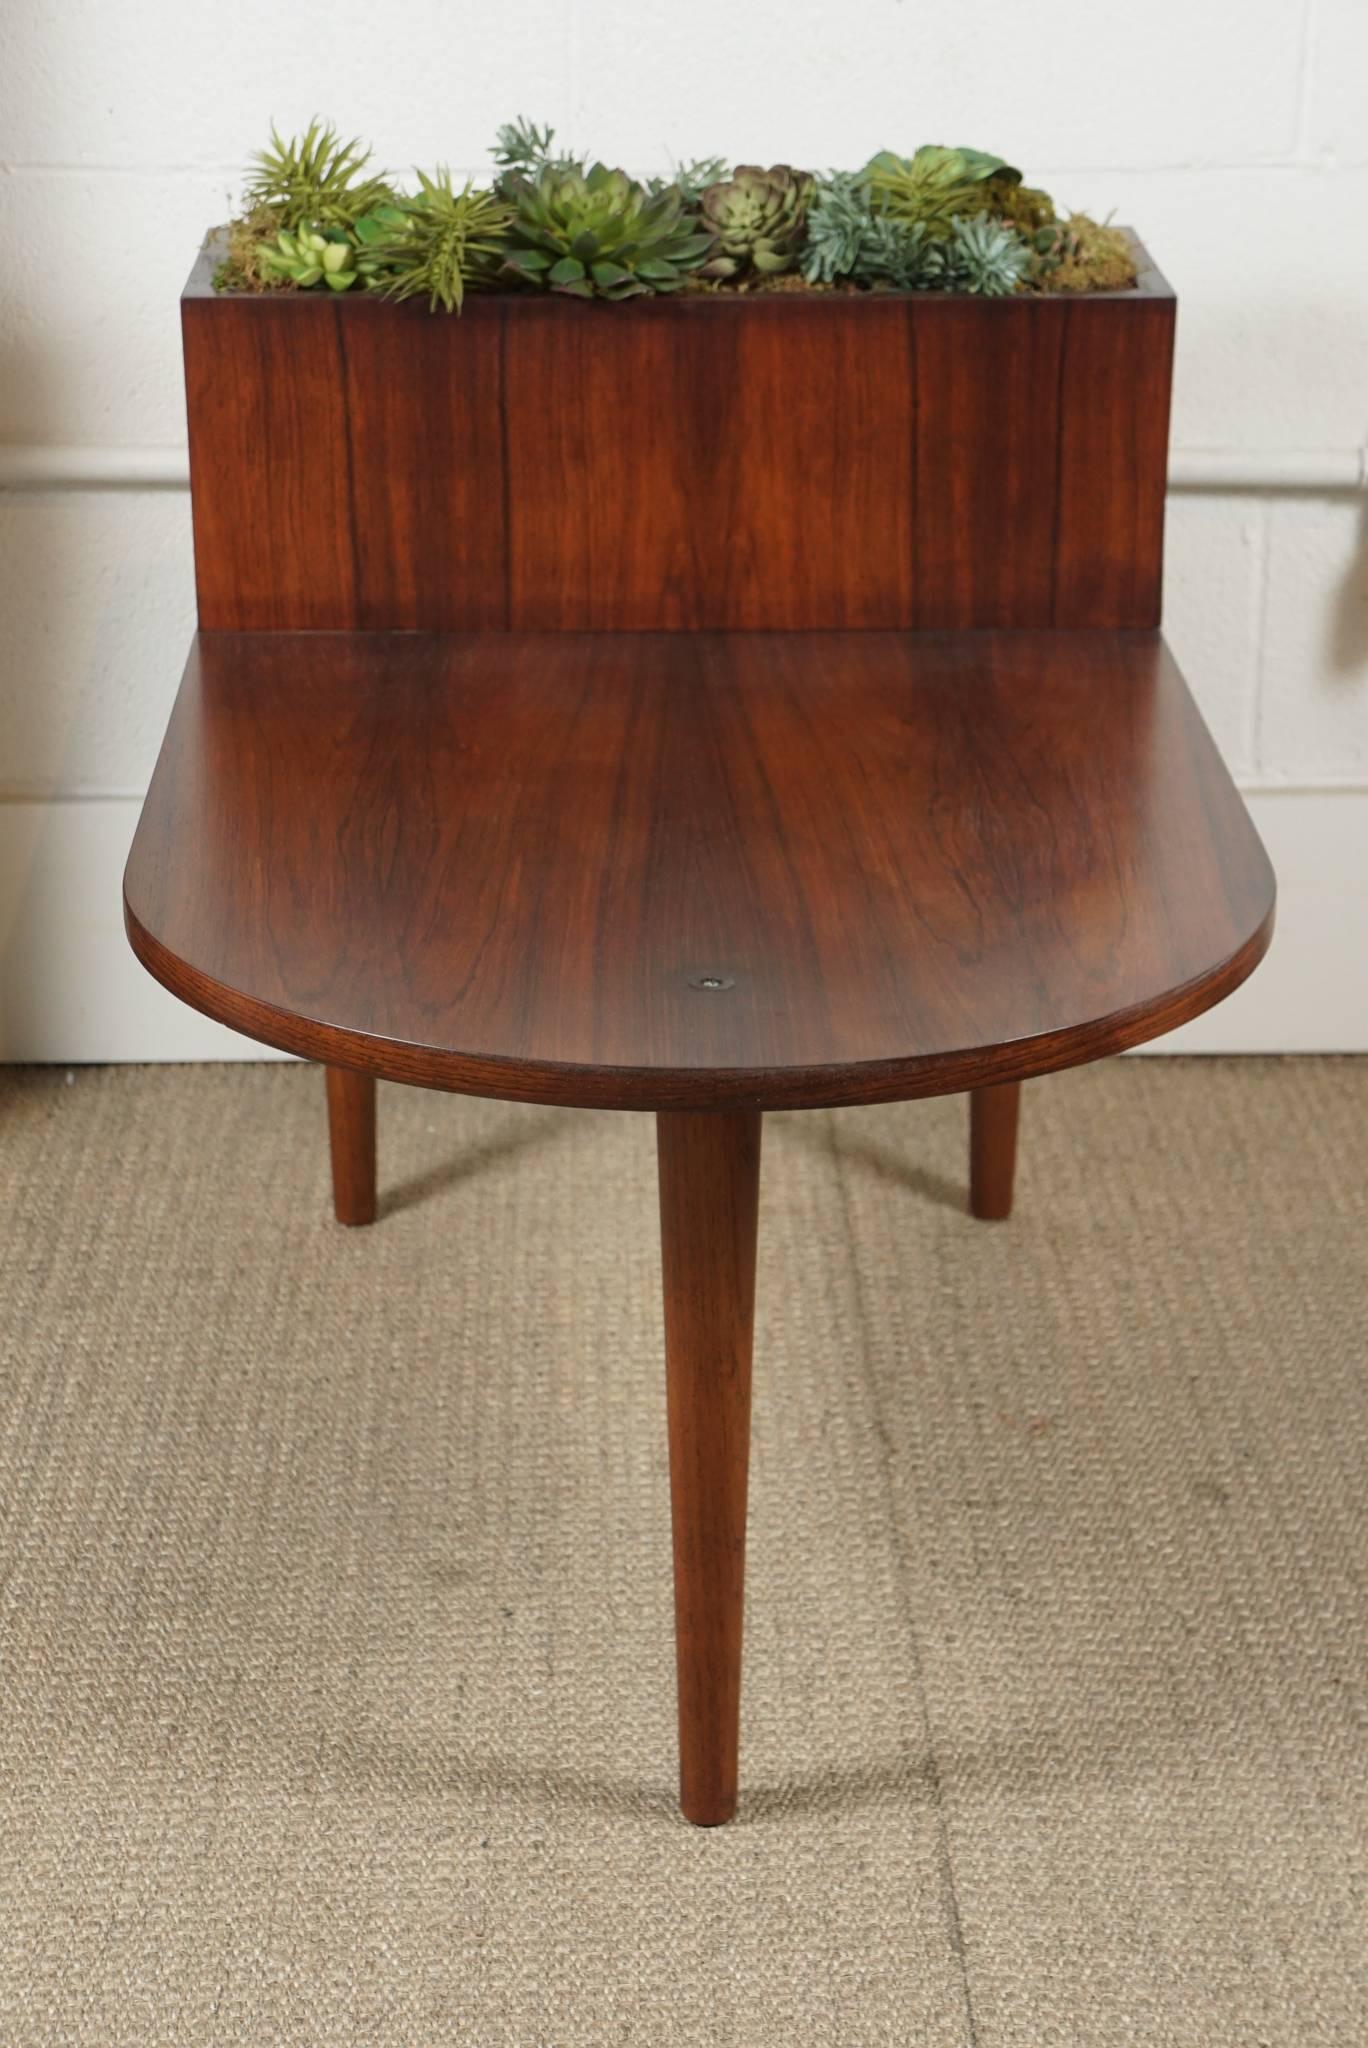 American Rosewood Table with Planter Insert For Sale